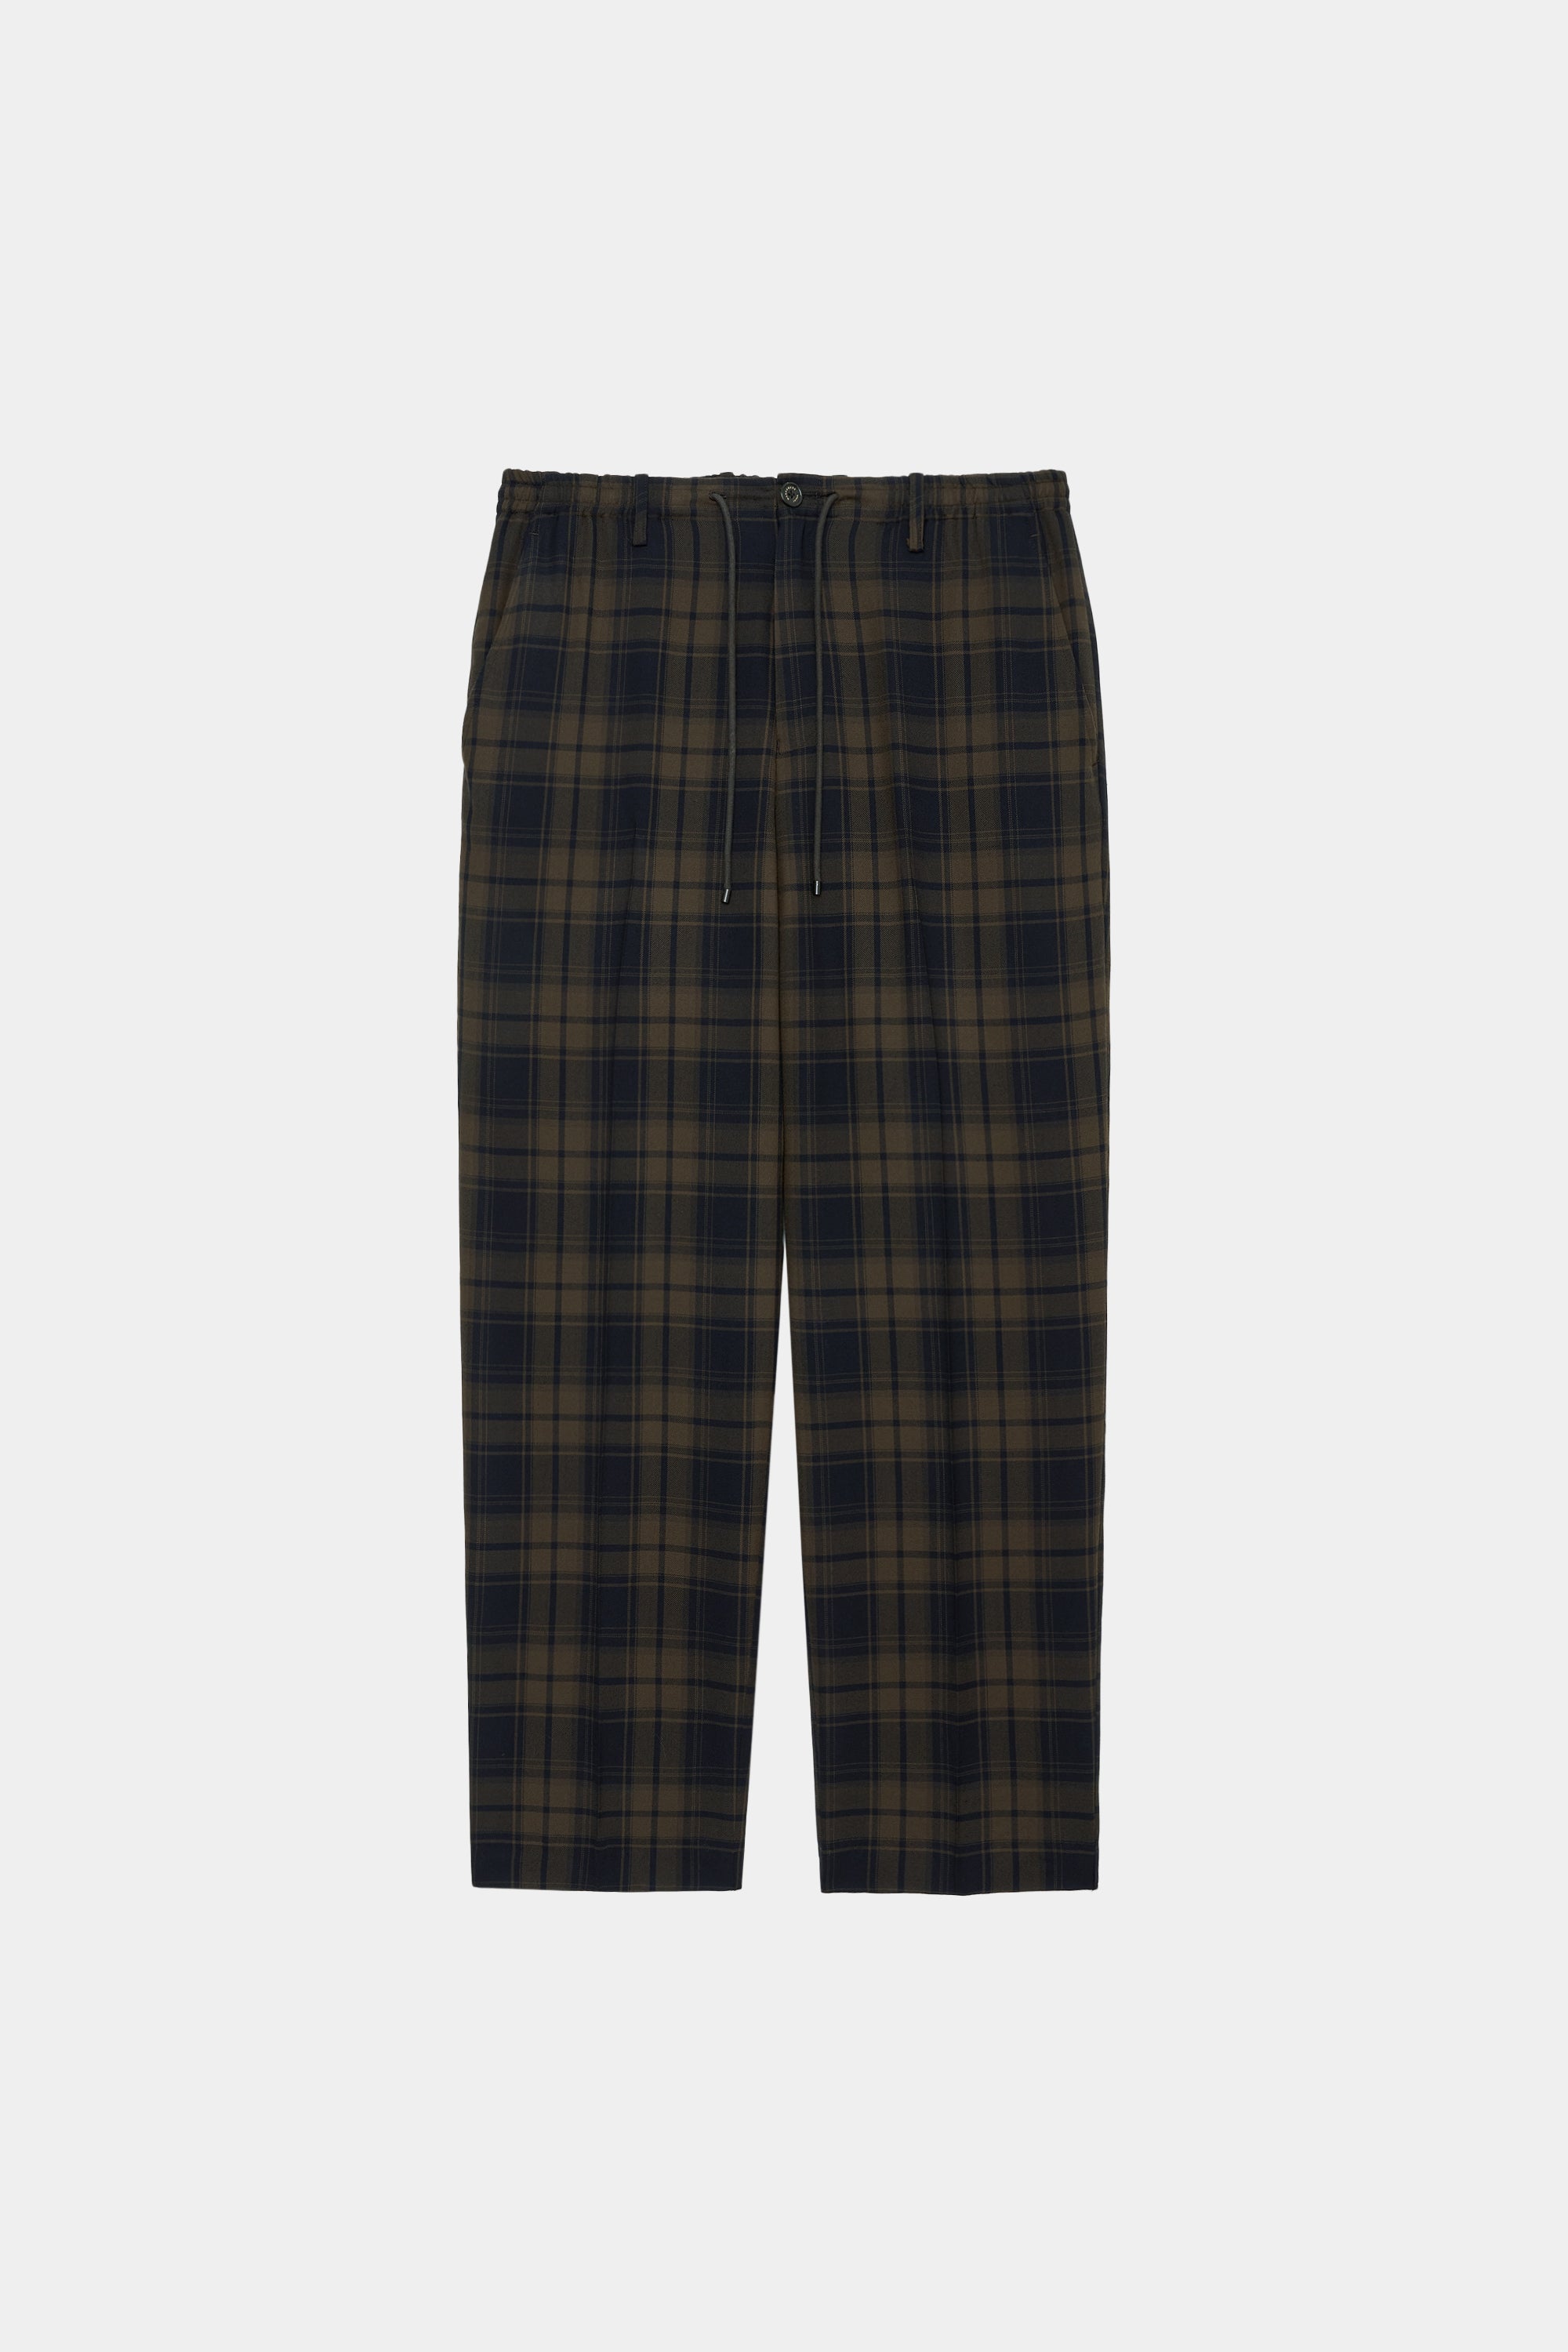  2/72 ORGANIC WOOL CHECK VIYELLA FLAT FRONT EASY TROUSERS, Brown Check